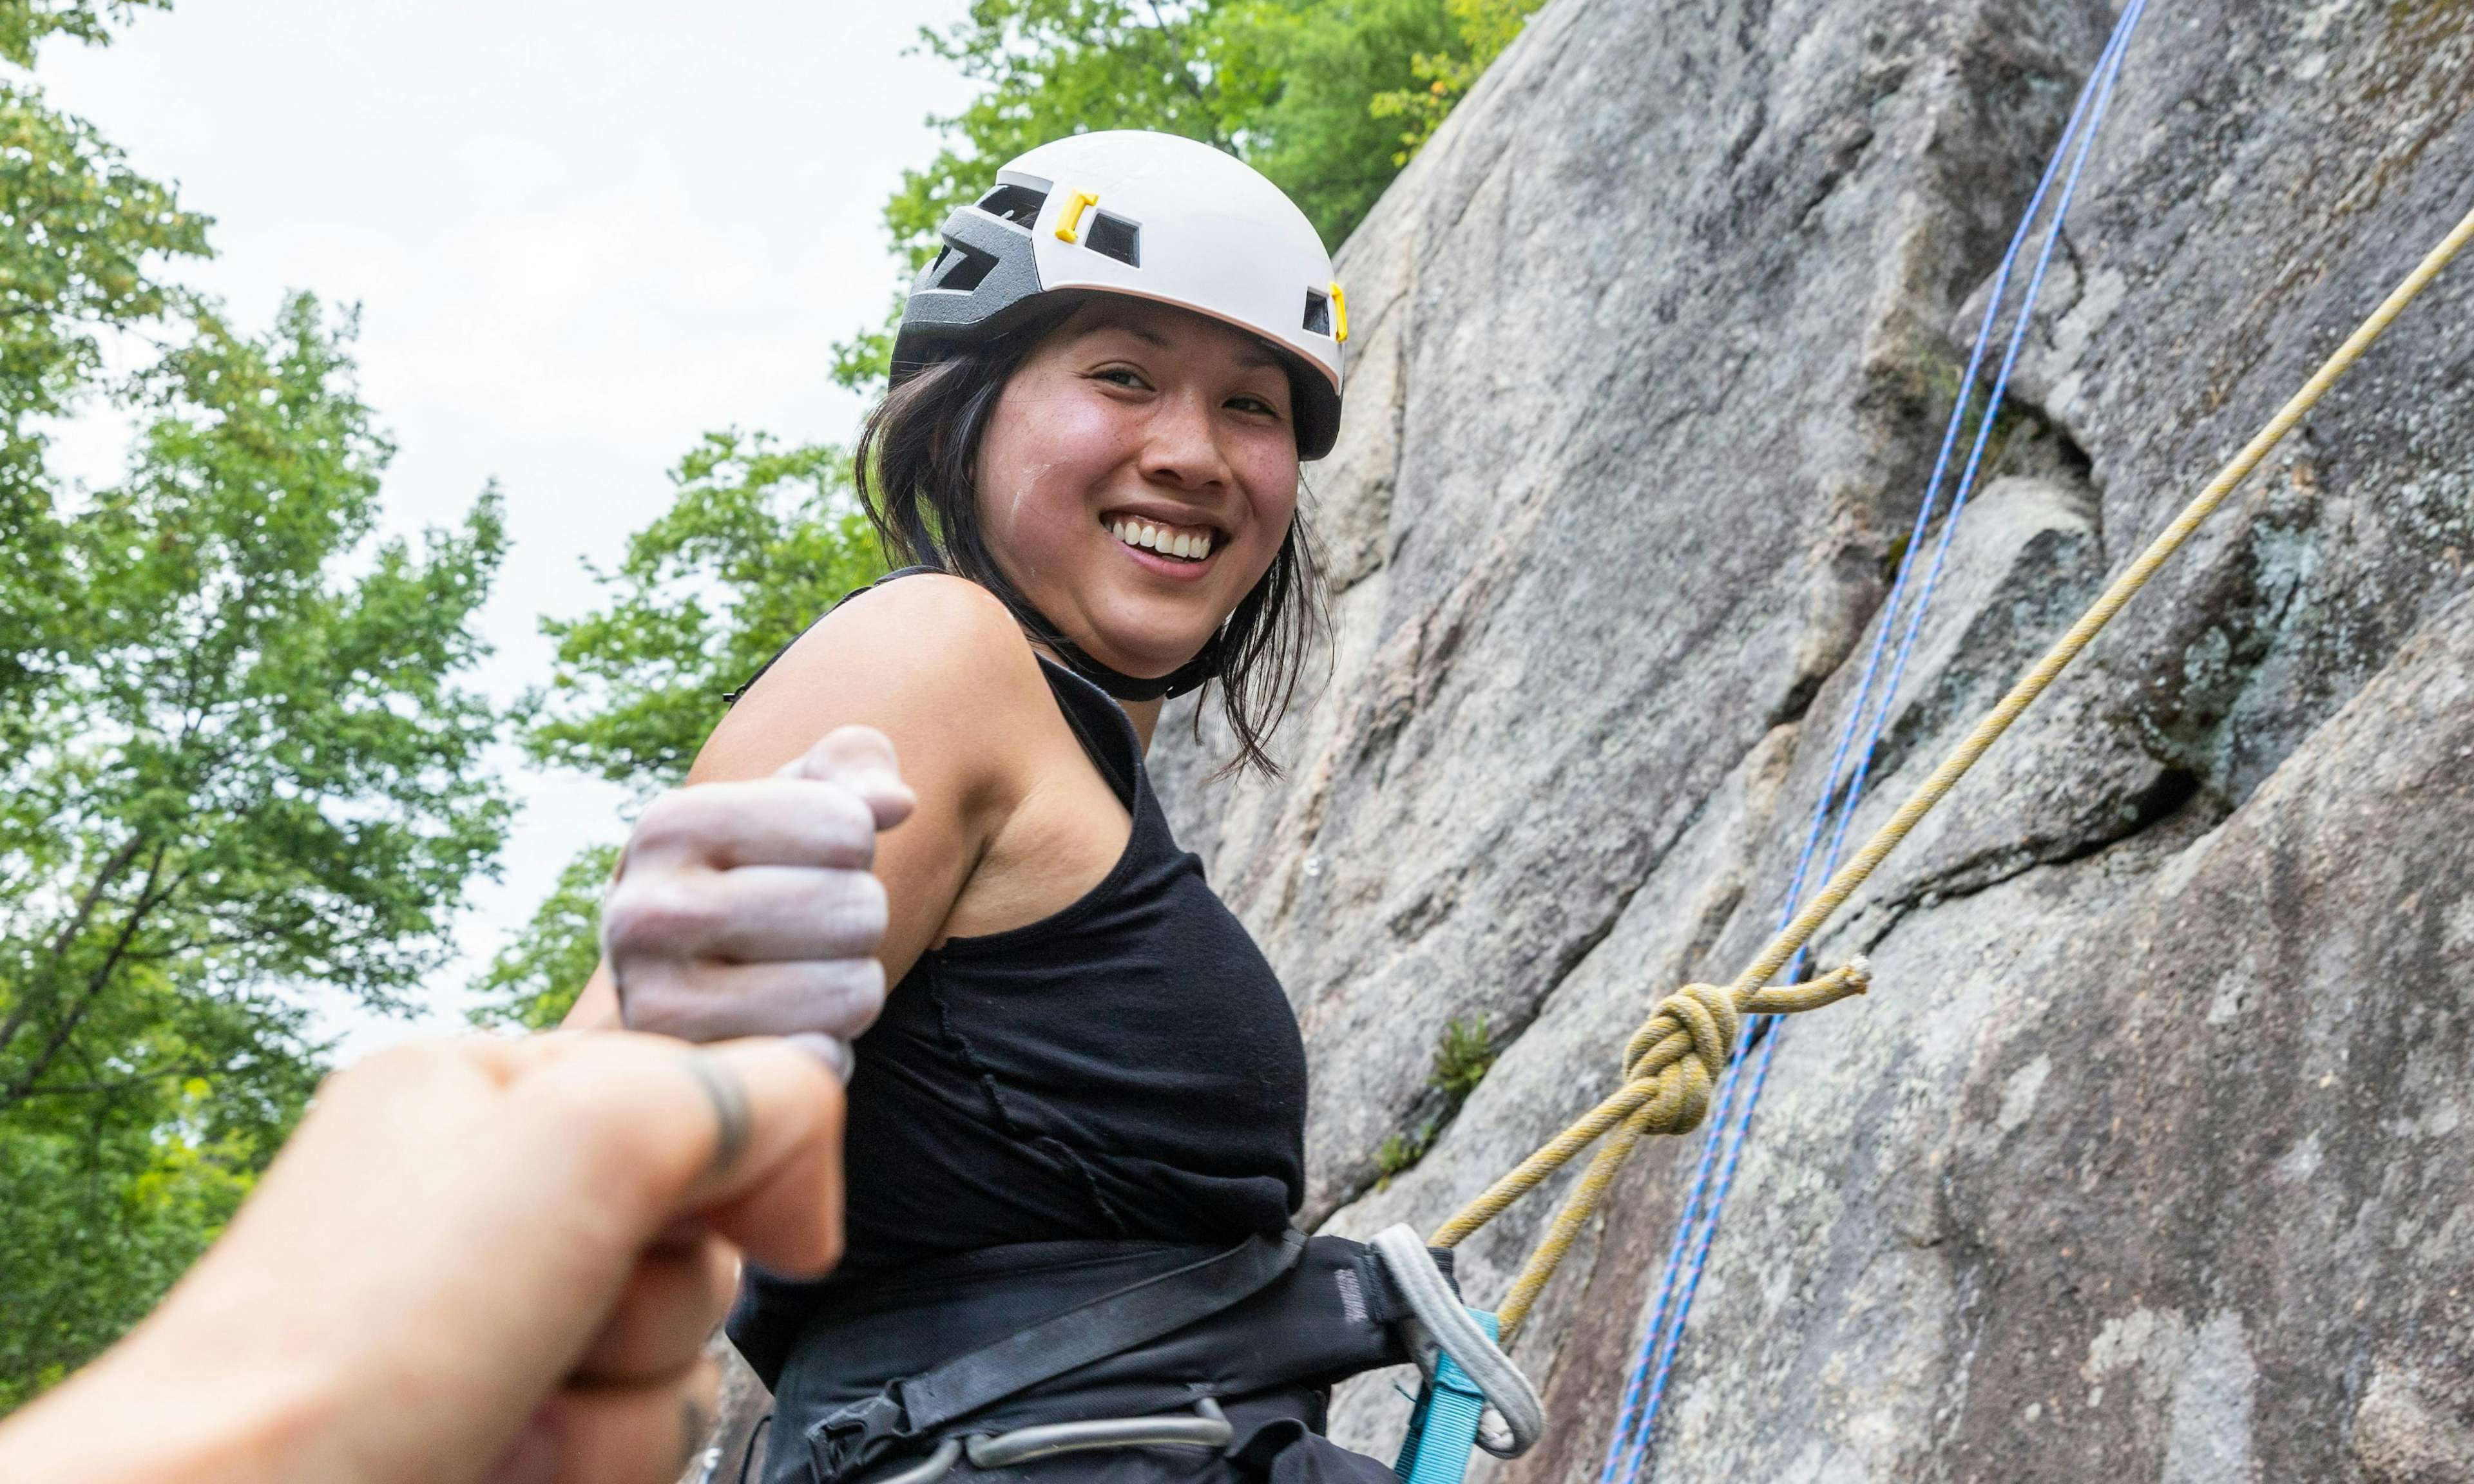 Climber smiling and giving photographer a fist bump